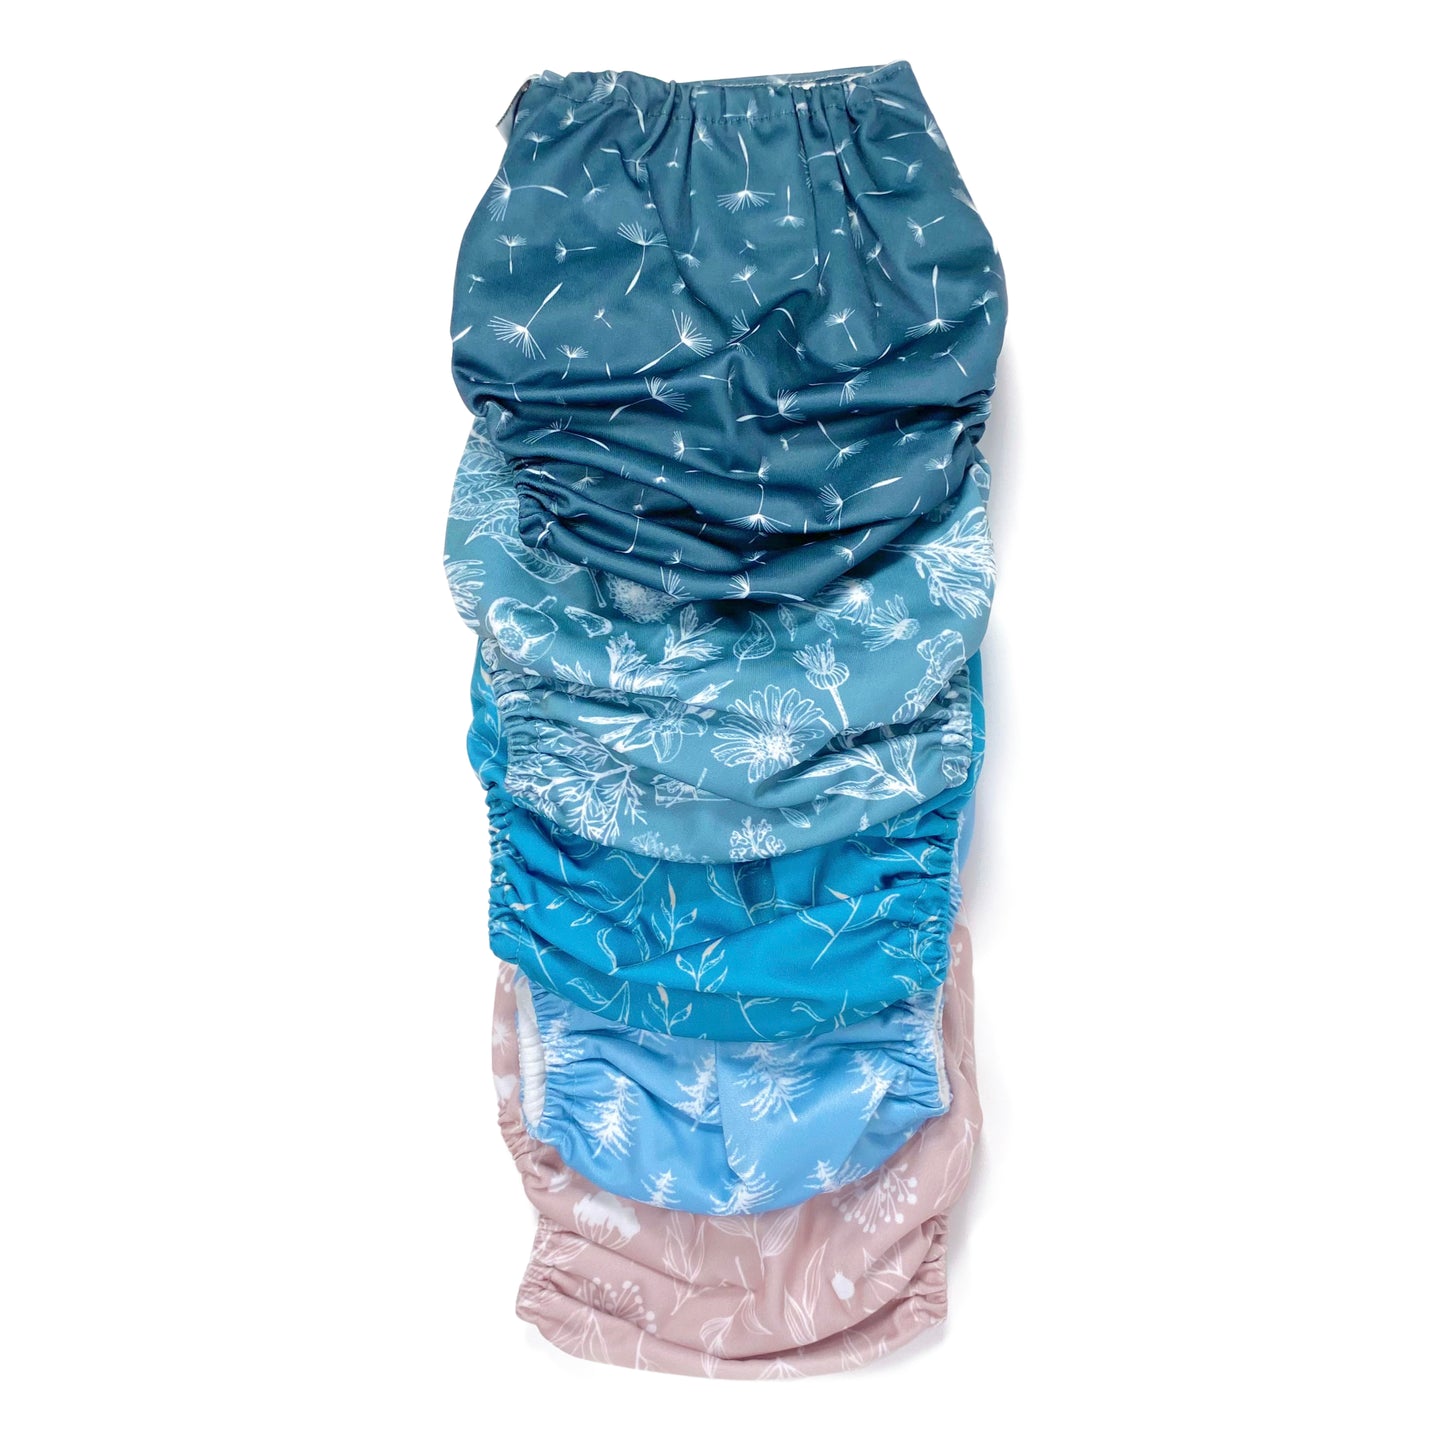 A set of five reusable nappies, made from 100% recycled polyester. The included nappies are: Wild Lilac, Cool Pines, Blue Fern, Blue Harvest and Midnight Breeze. View shows all five nappies back facing, in a vertical line.